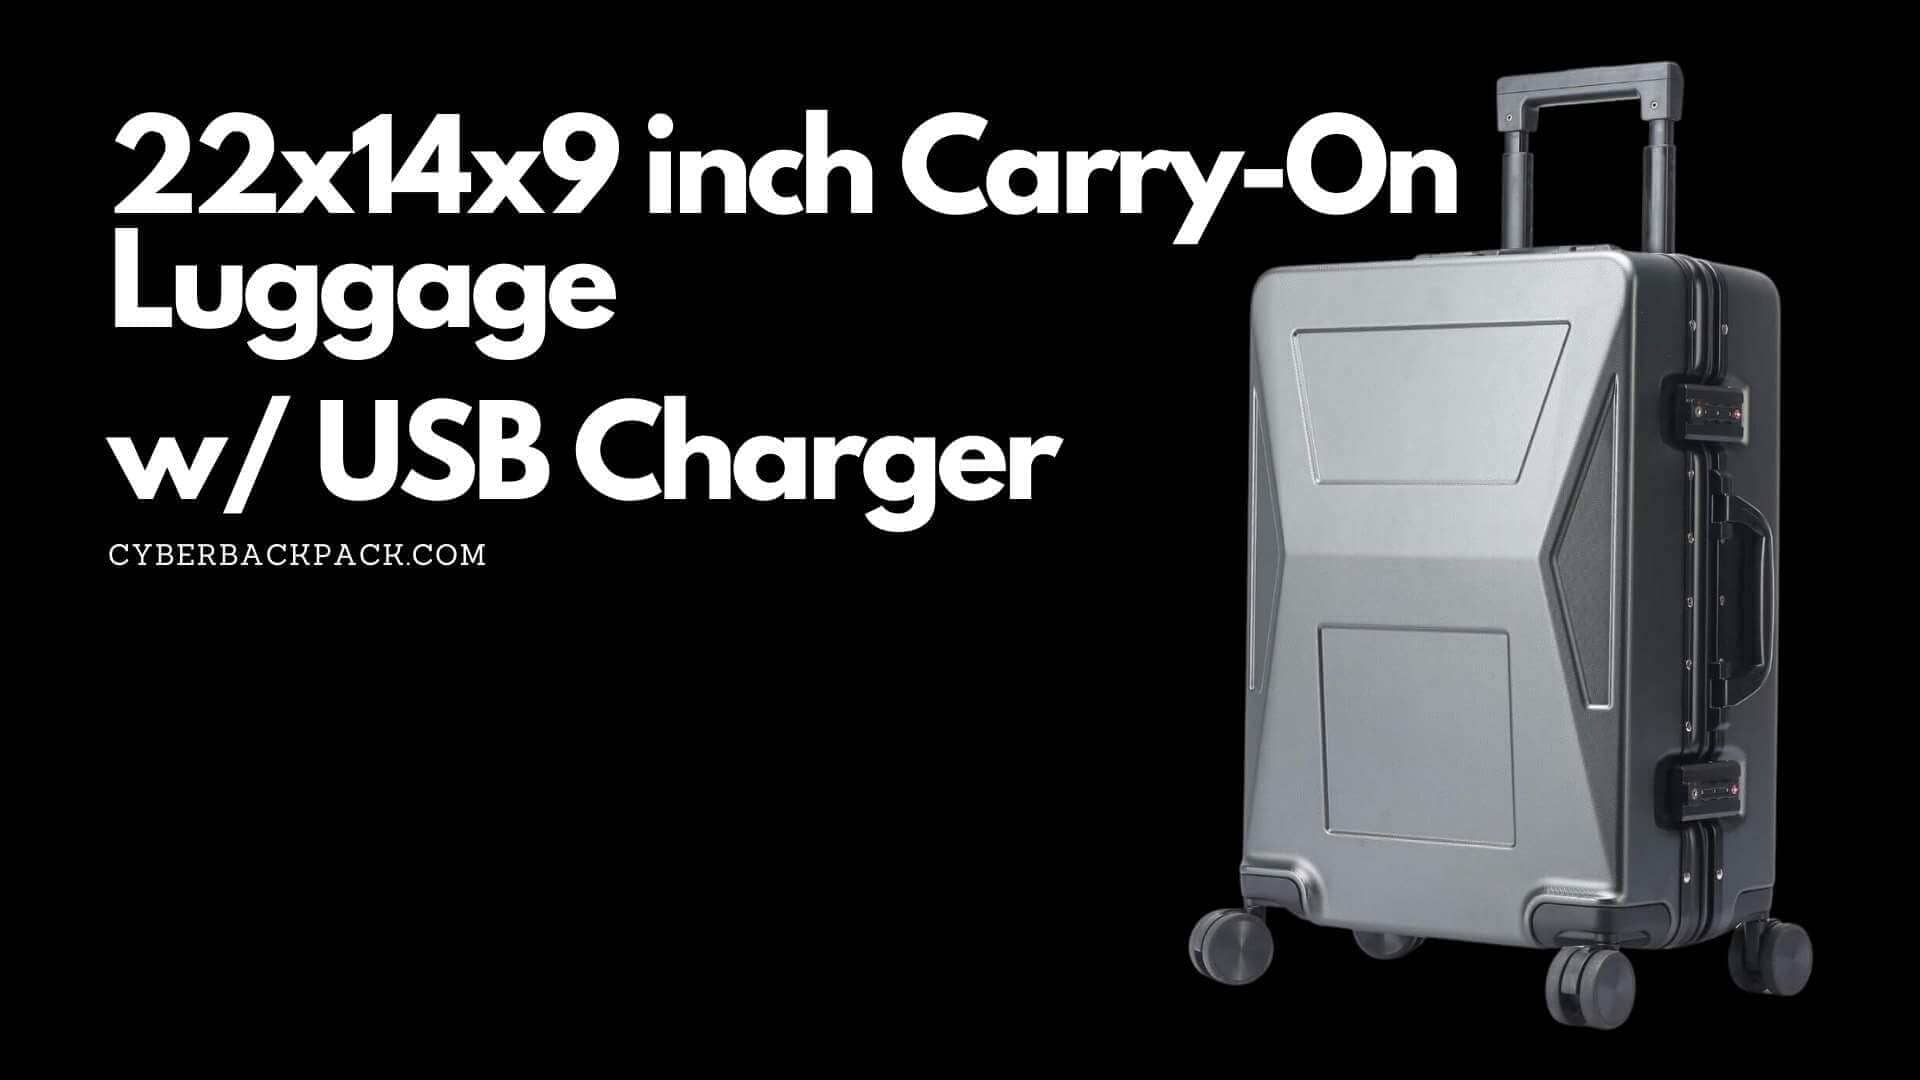 The Ultimate Guide to 22x14x9 inch Carry-On Luggage: Airline-Approved Sizes and Features